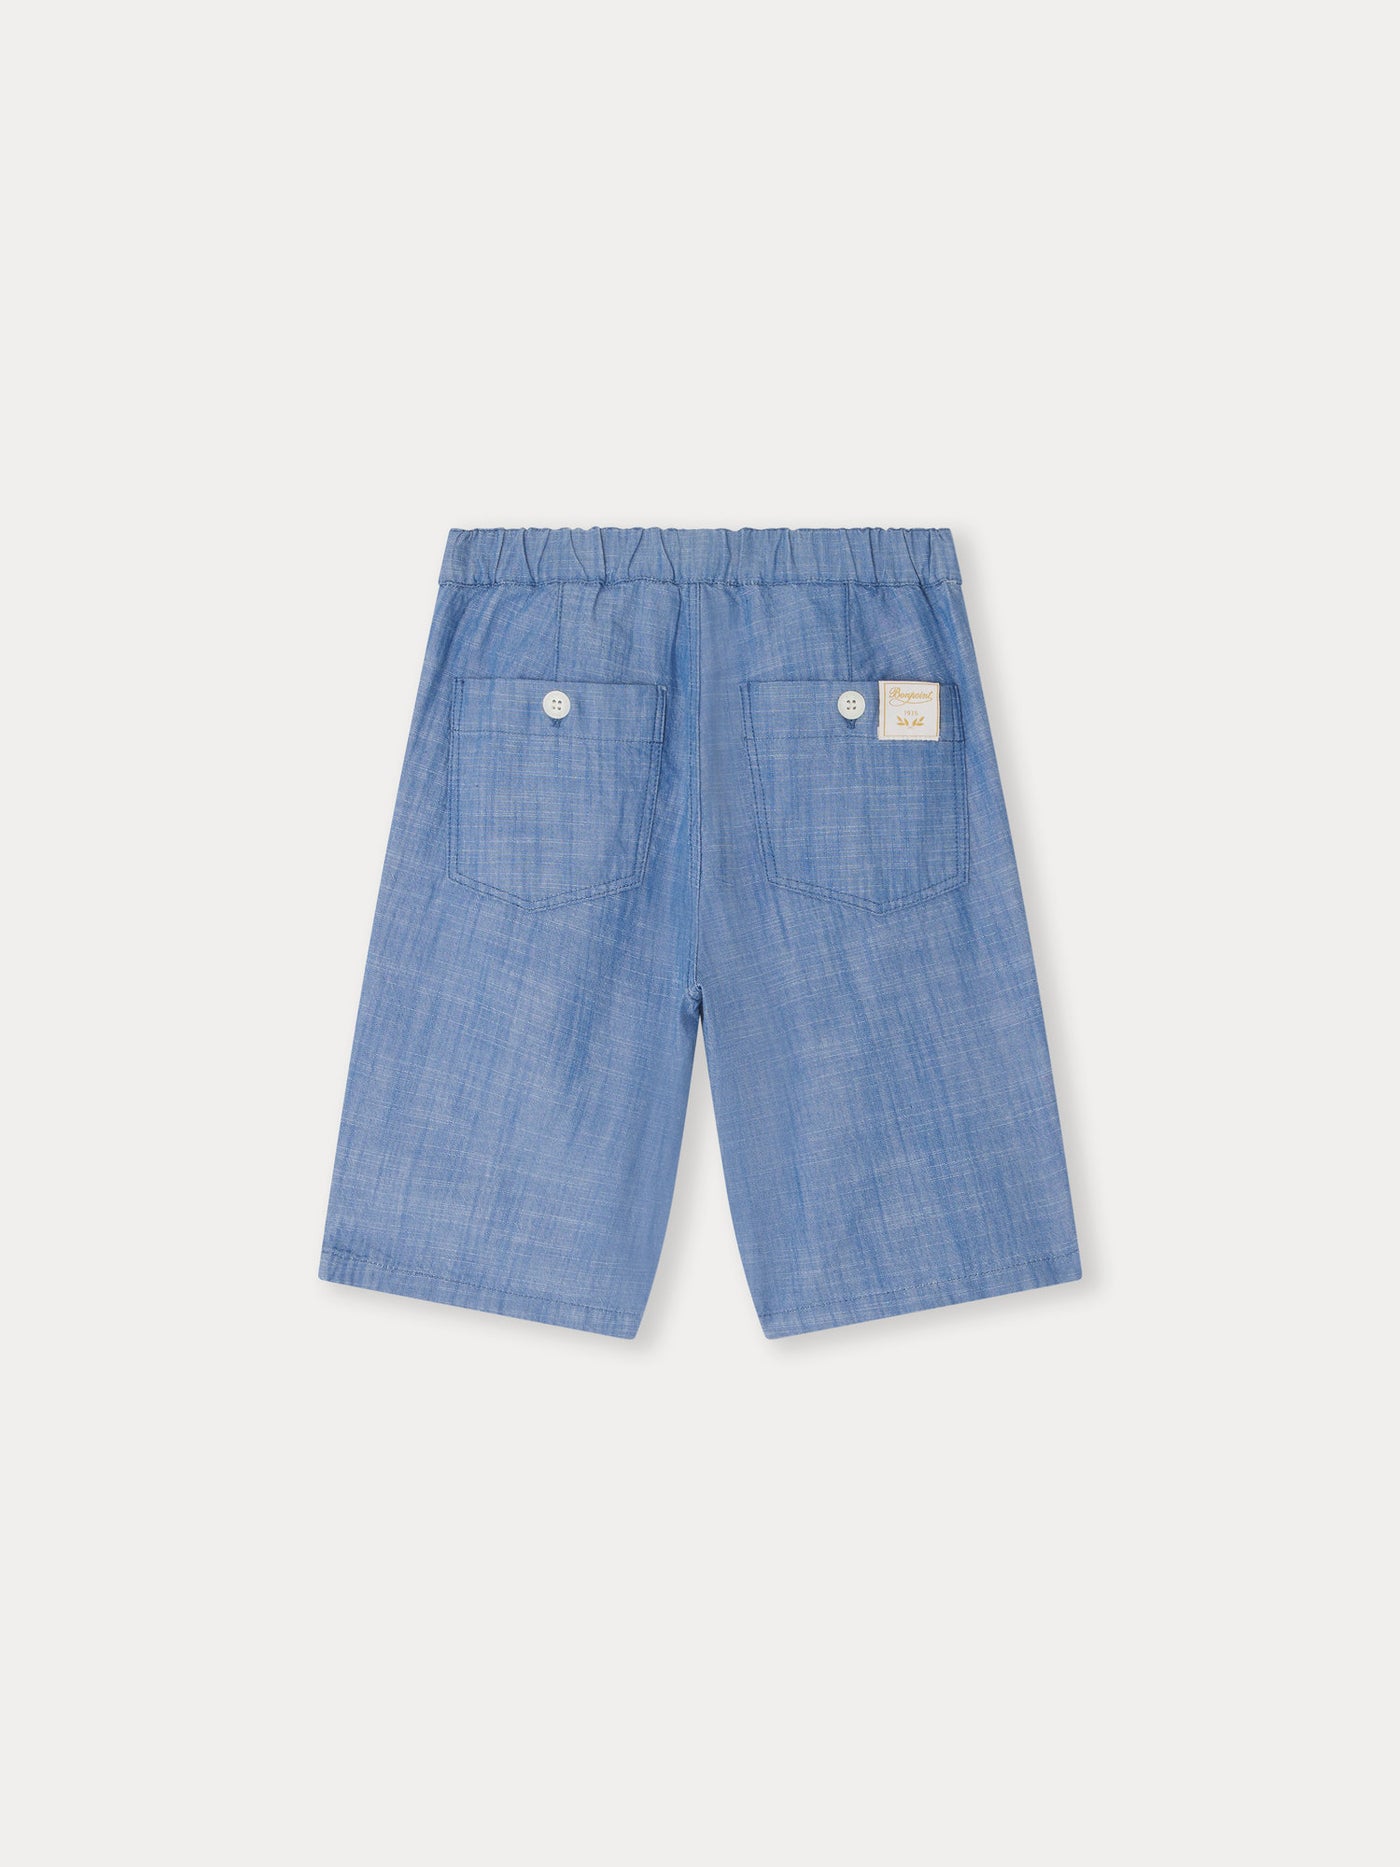 Conway Shorts blue